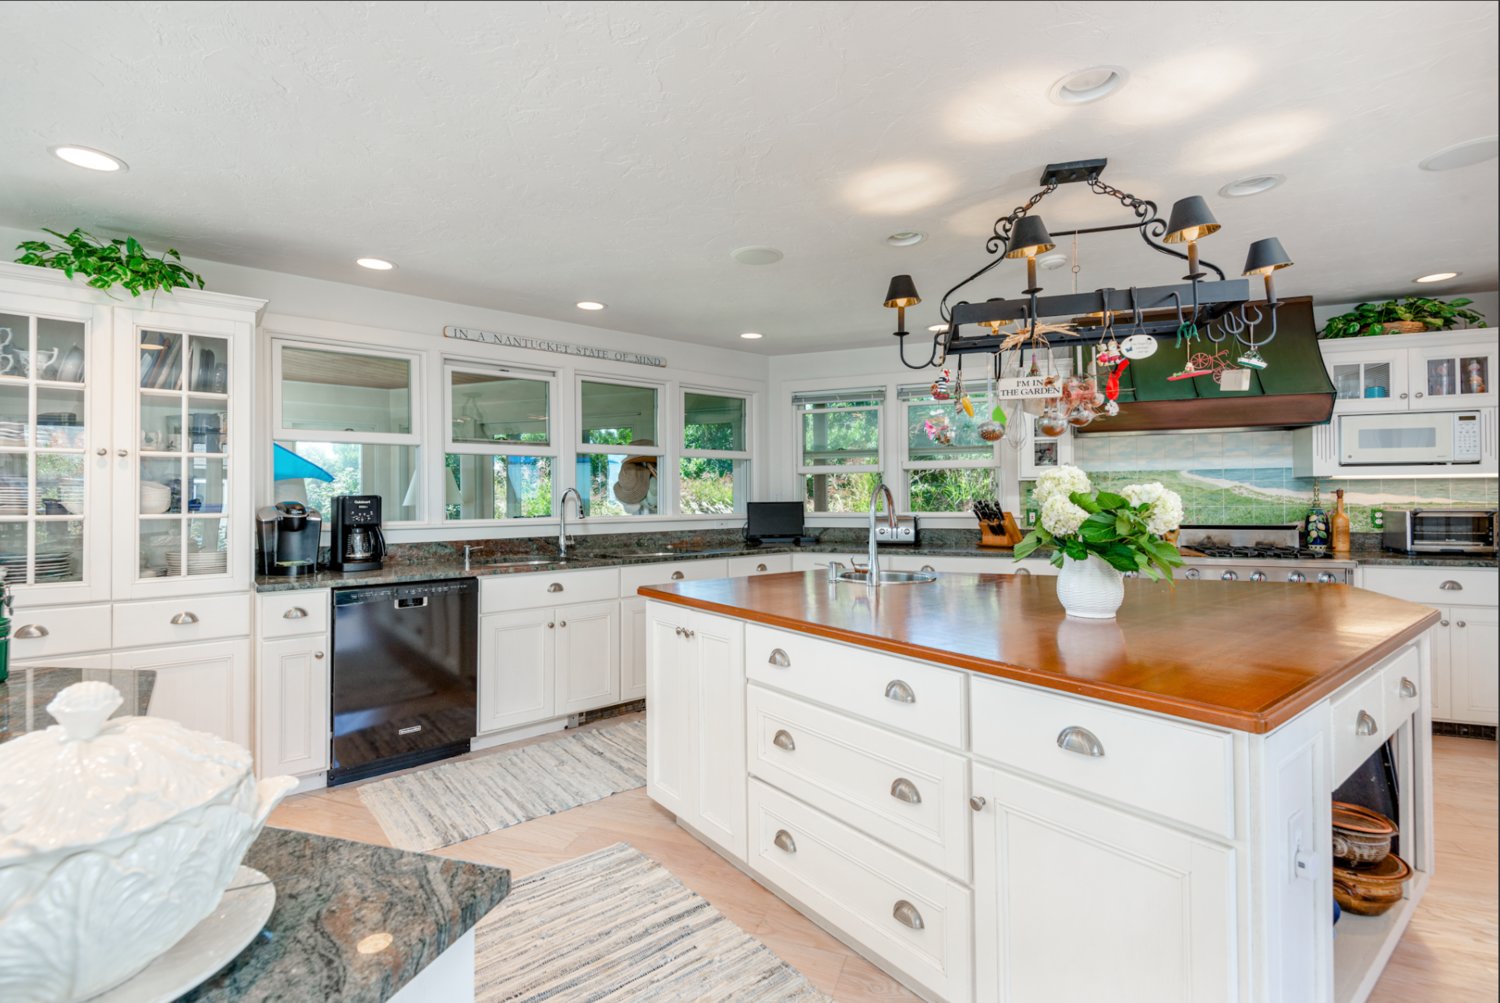 The spacious gourmet kitchen has granite countertops, a wood-topped center island with sink, and high-end appliances by Sub-Zero and KitchenAid.